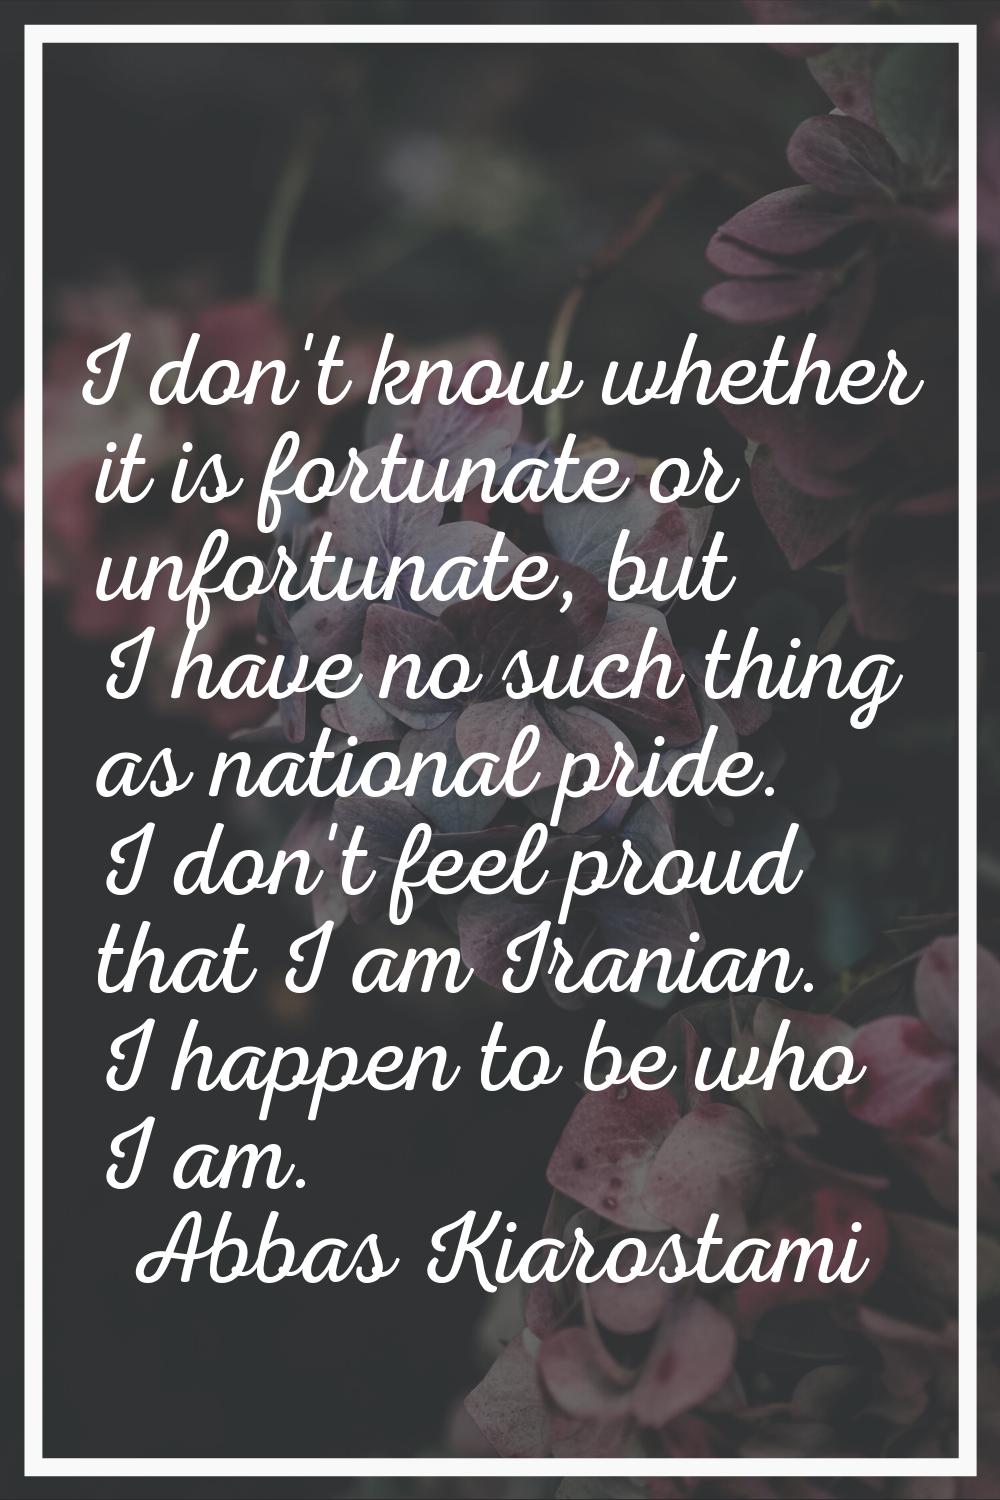 I don't know whether it is fortunate or unfortunate, but I have no such thing as national pride. I 